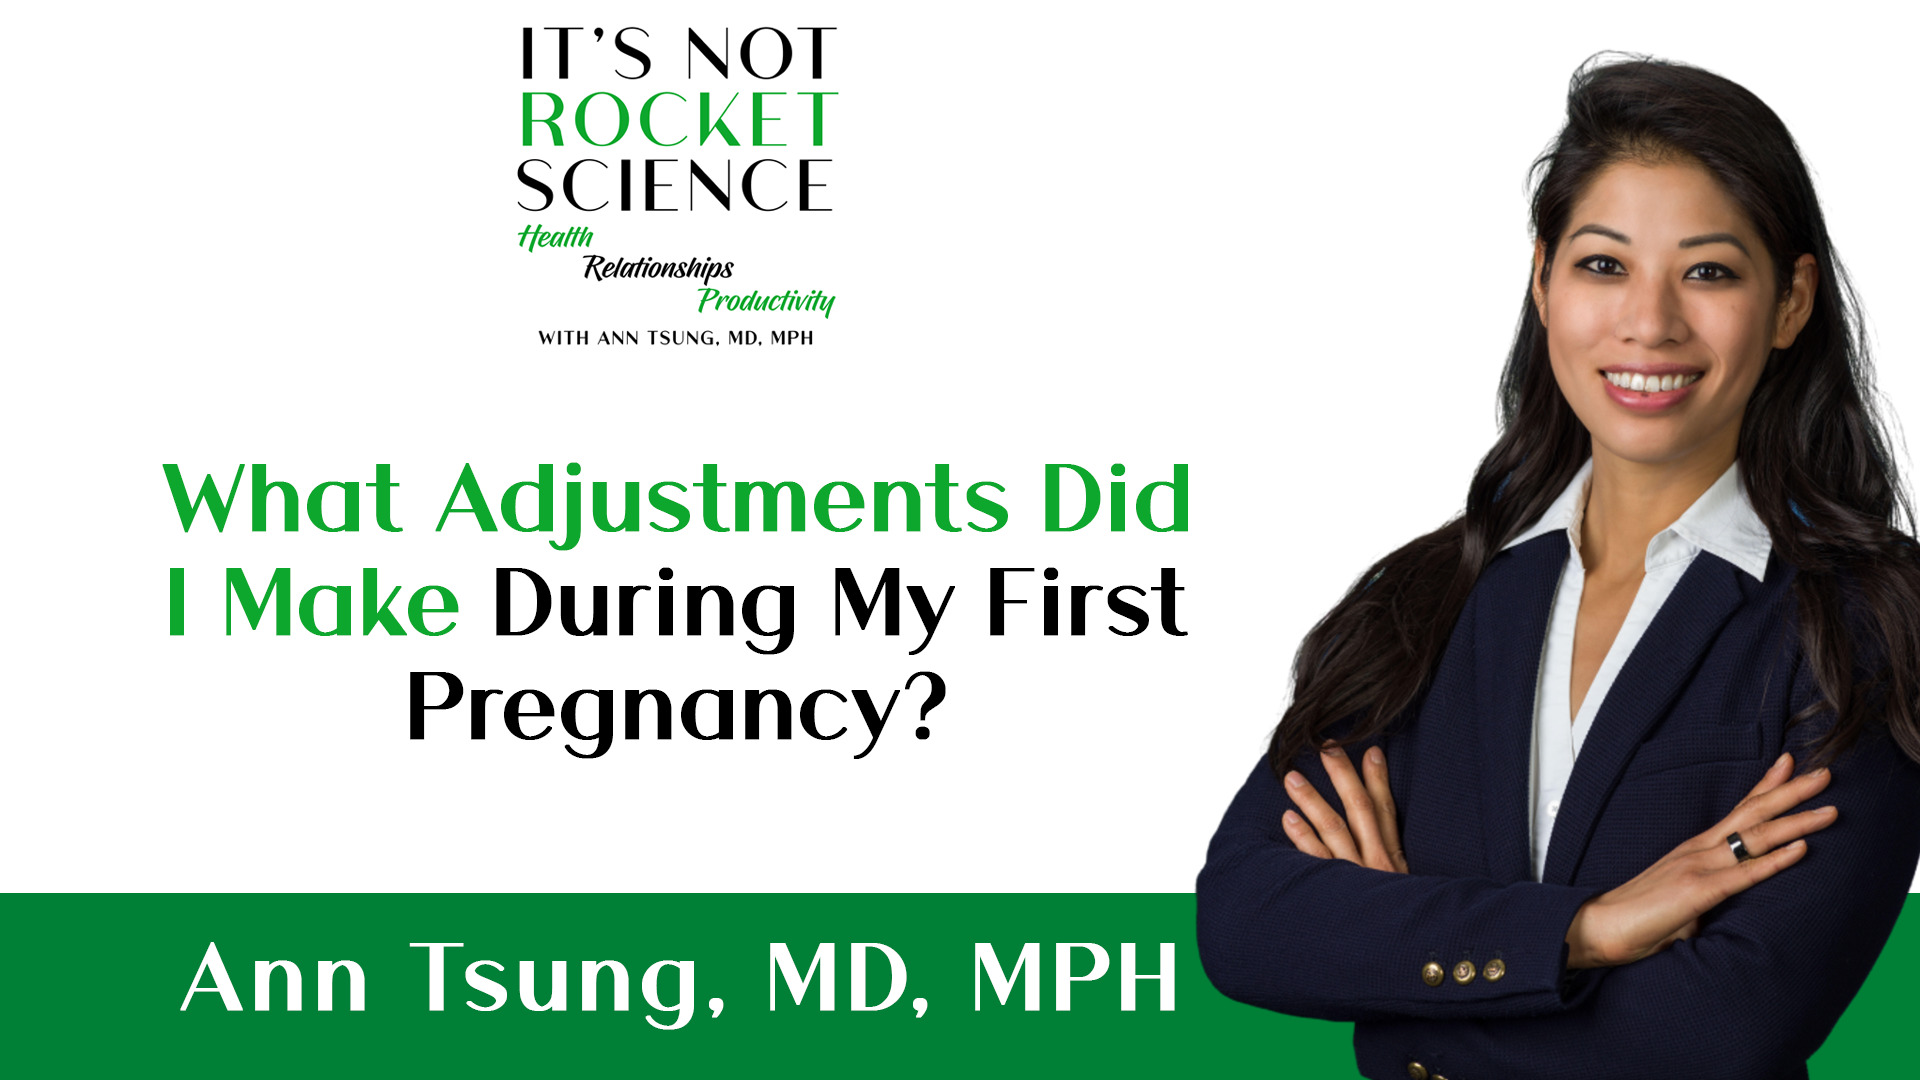 046. What Adjustments Did I Make During My First Pregnancy? Time Restricted Eating, Carbohydrate Intake, Weightlifting, Morning Routine, Sleep, and Recovery.